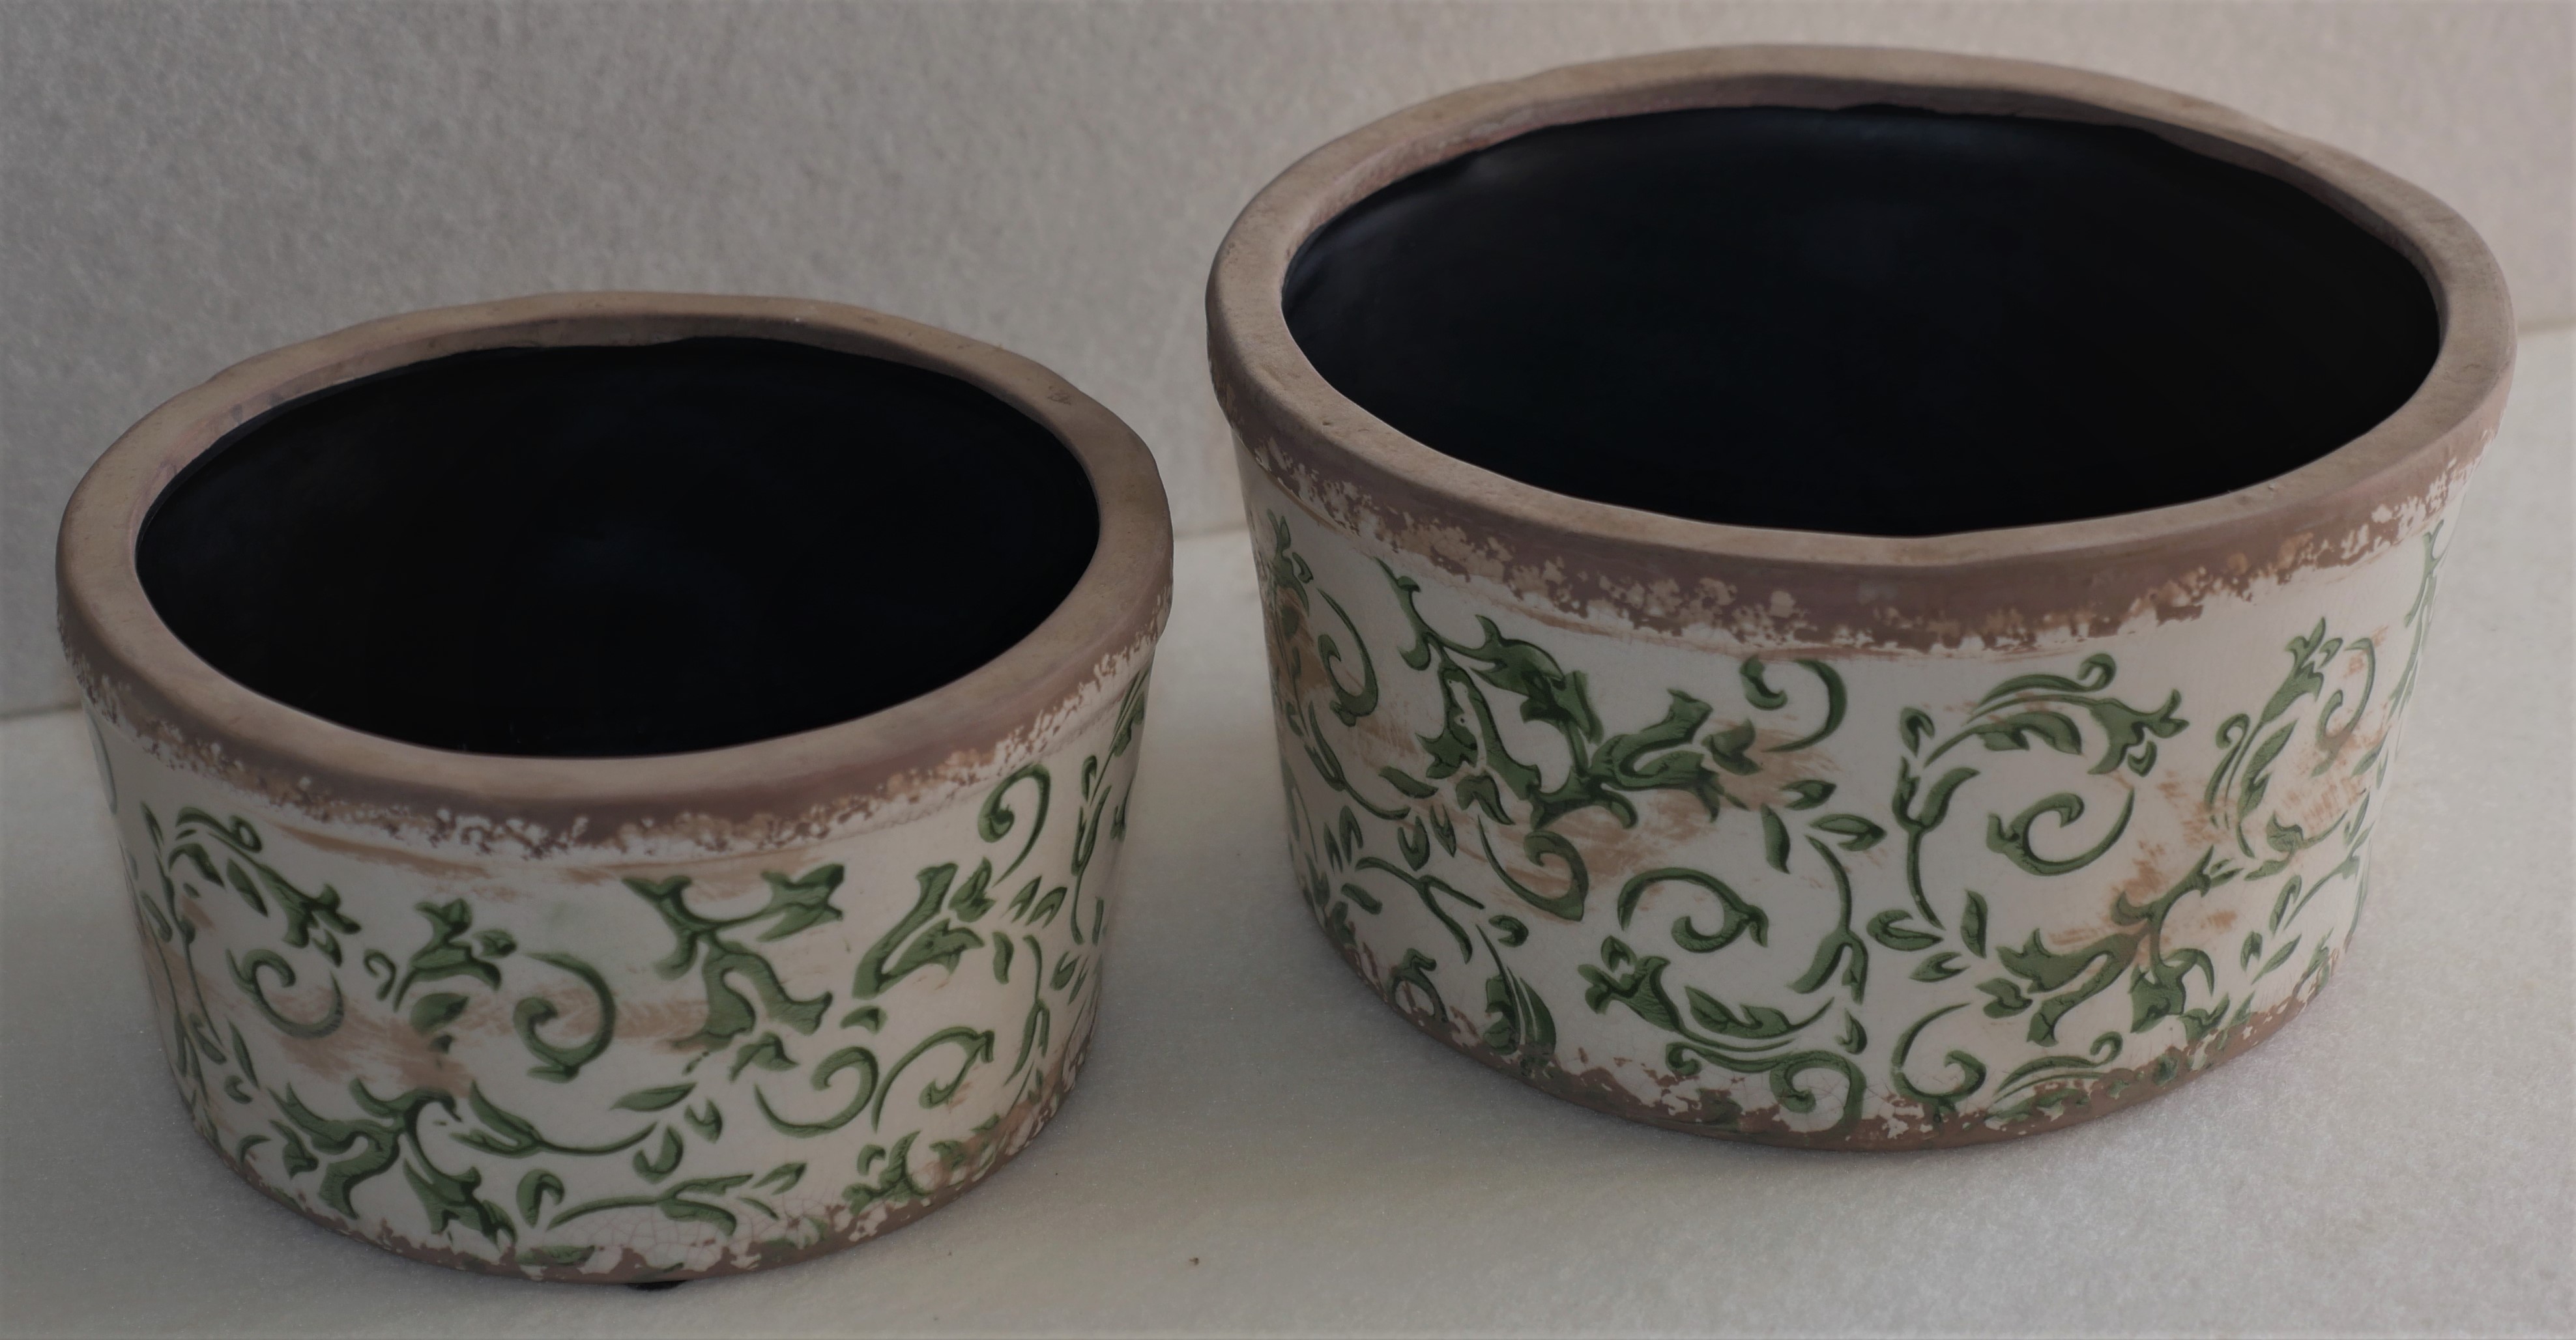 Green and white plant pot bowls pottery.